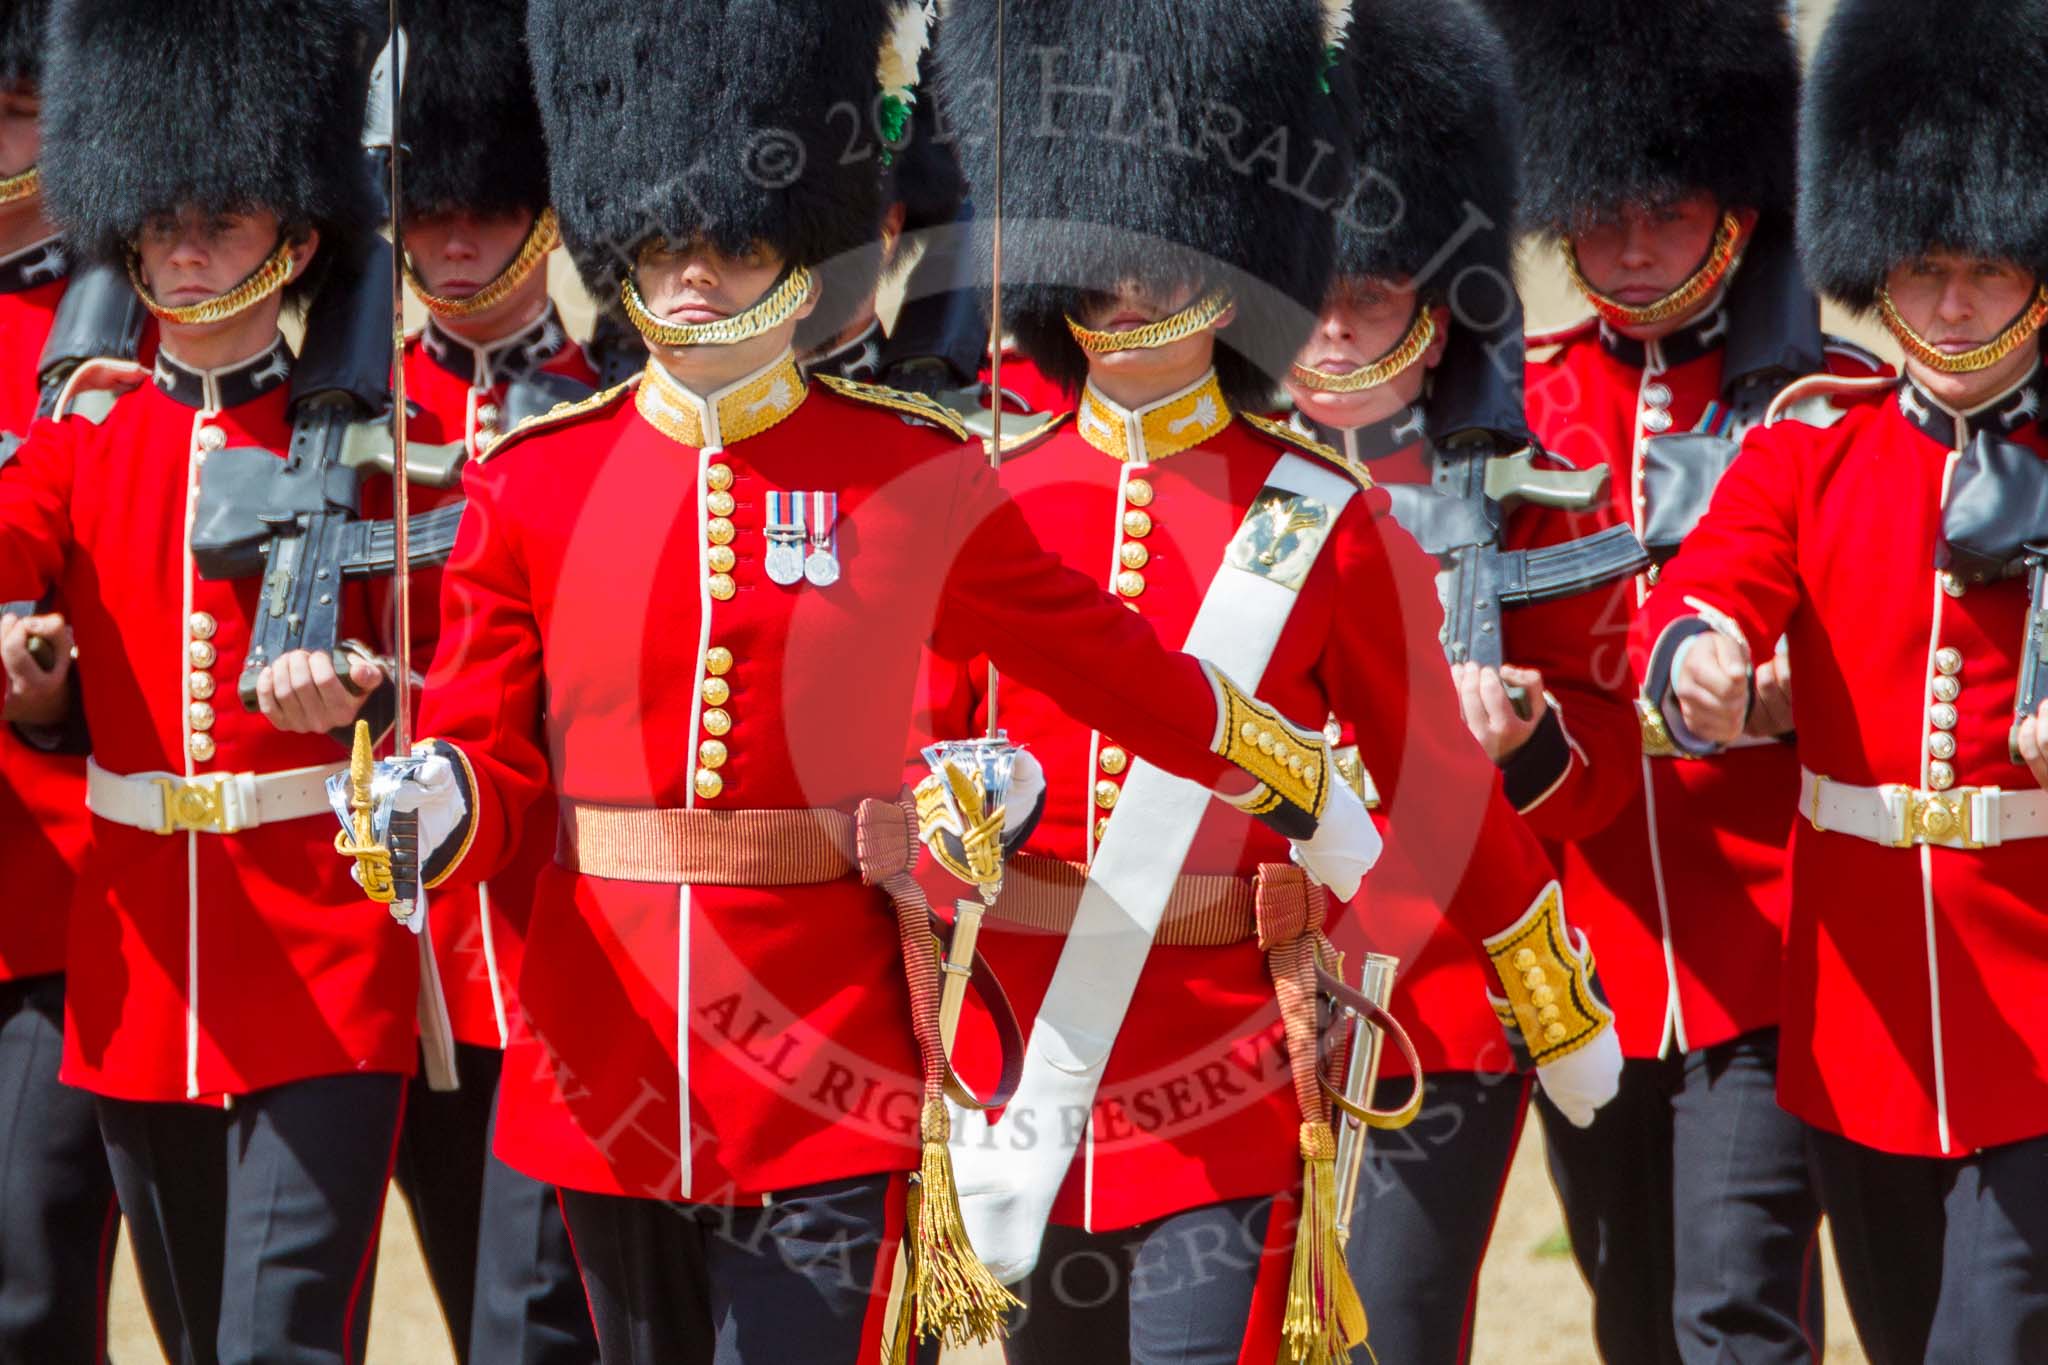 The Colonel's Review 2015.
Horse Guards Parade, Westminster,
London,

United Kingdom,
on 06 June 2015 at 11:16, image #292